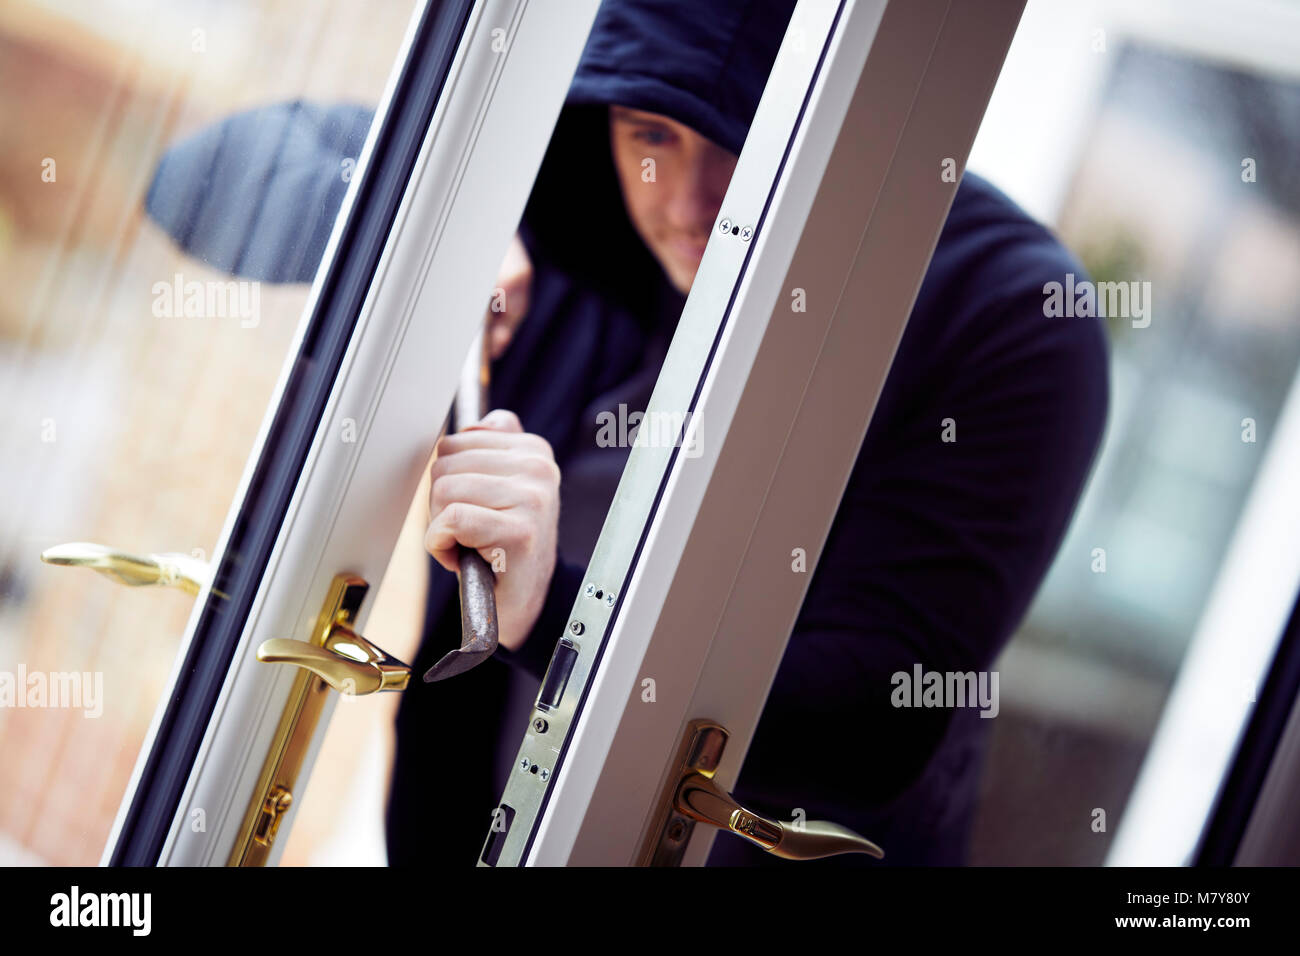 Person breaking into property Stock Photo